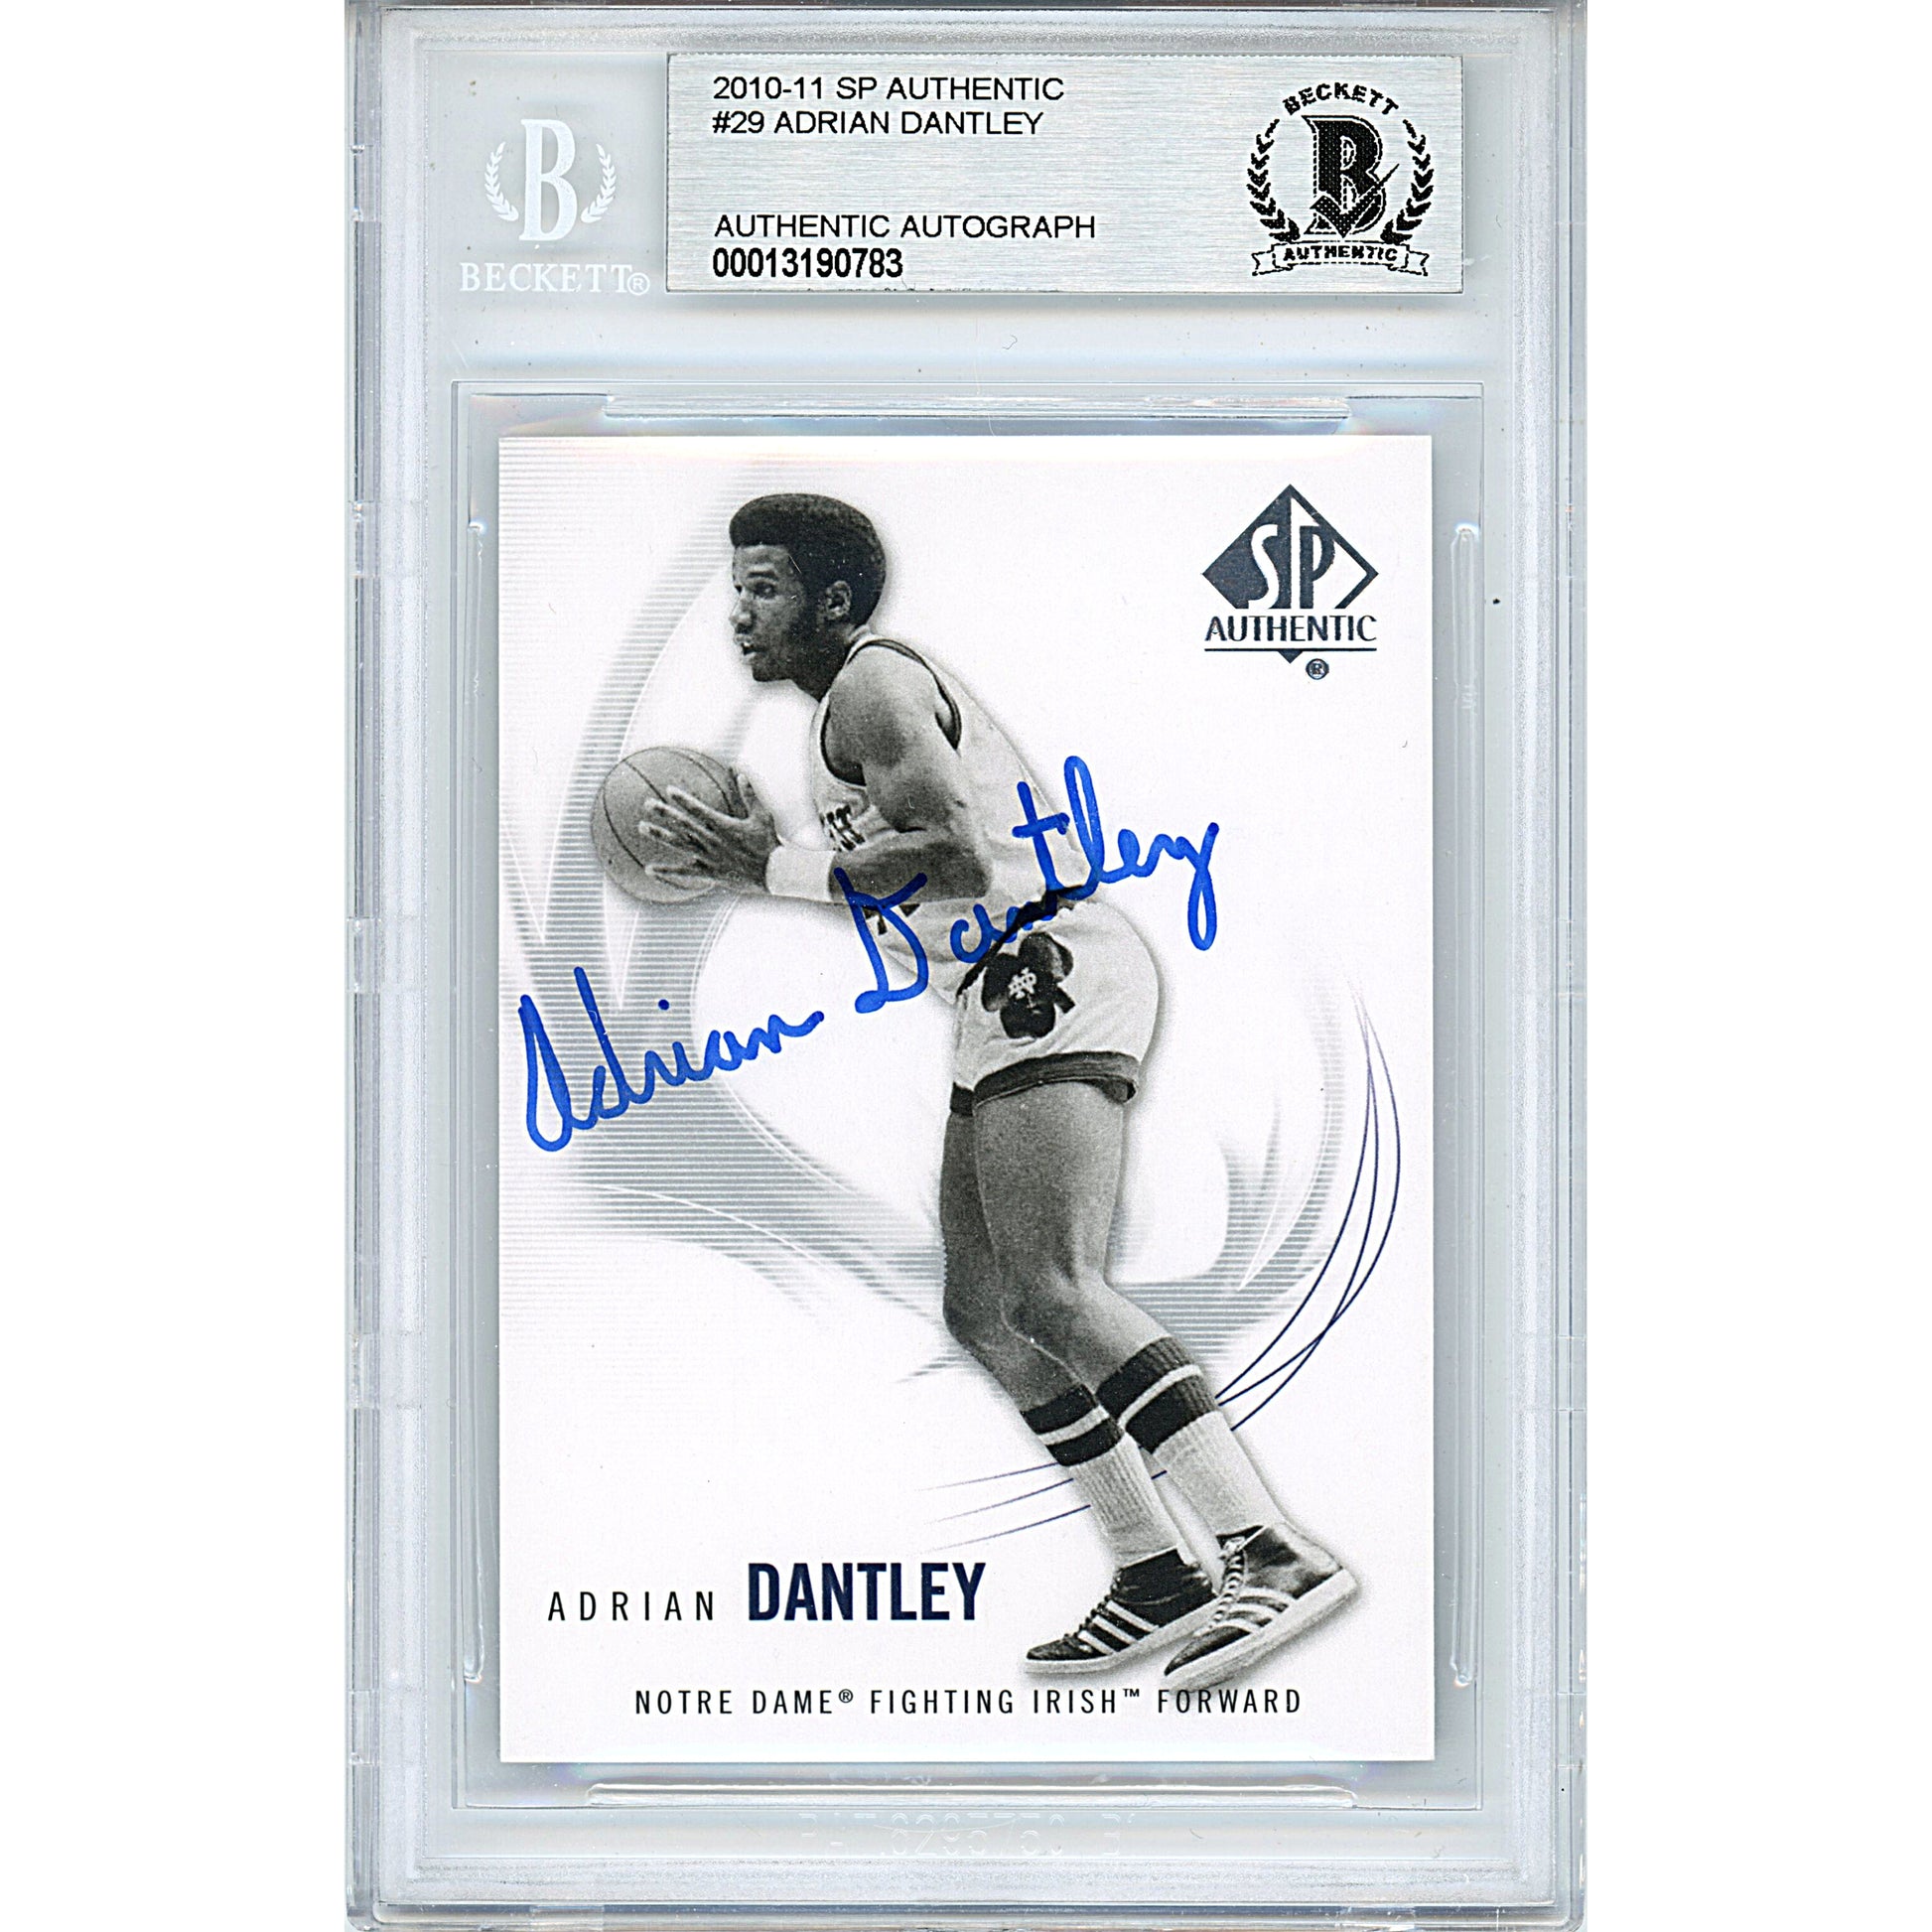 Basketballs- Autographed- Adrian Dantley Signed Notre Dame Fighting Irish 2010-2011 SP Authentic Basketball Card Beckett BAS Slabbed 00013190783 - 101